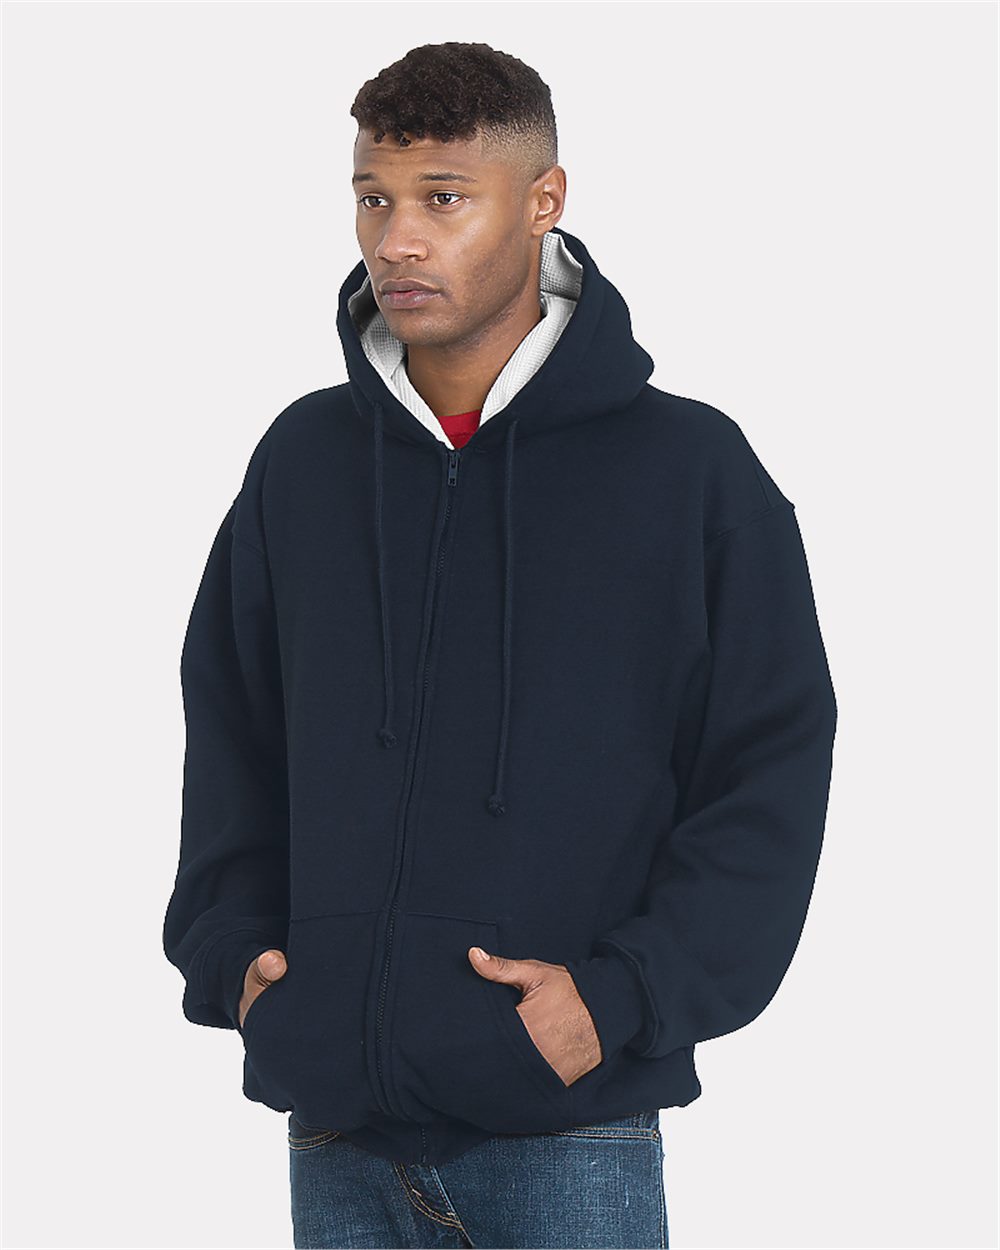 Bayside 940 - USA-Made Super Heavy Thermal Lined Full-Zip Hooded Sweatshirt